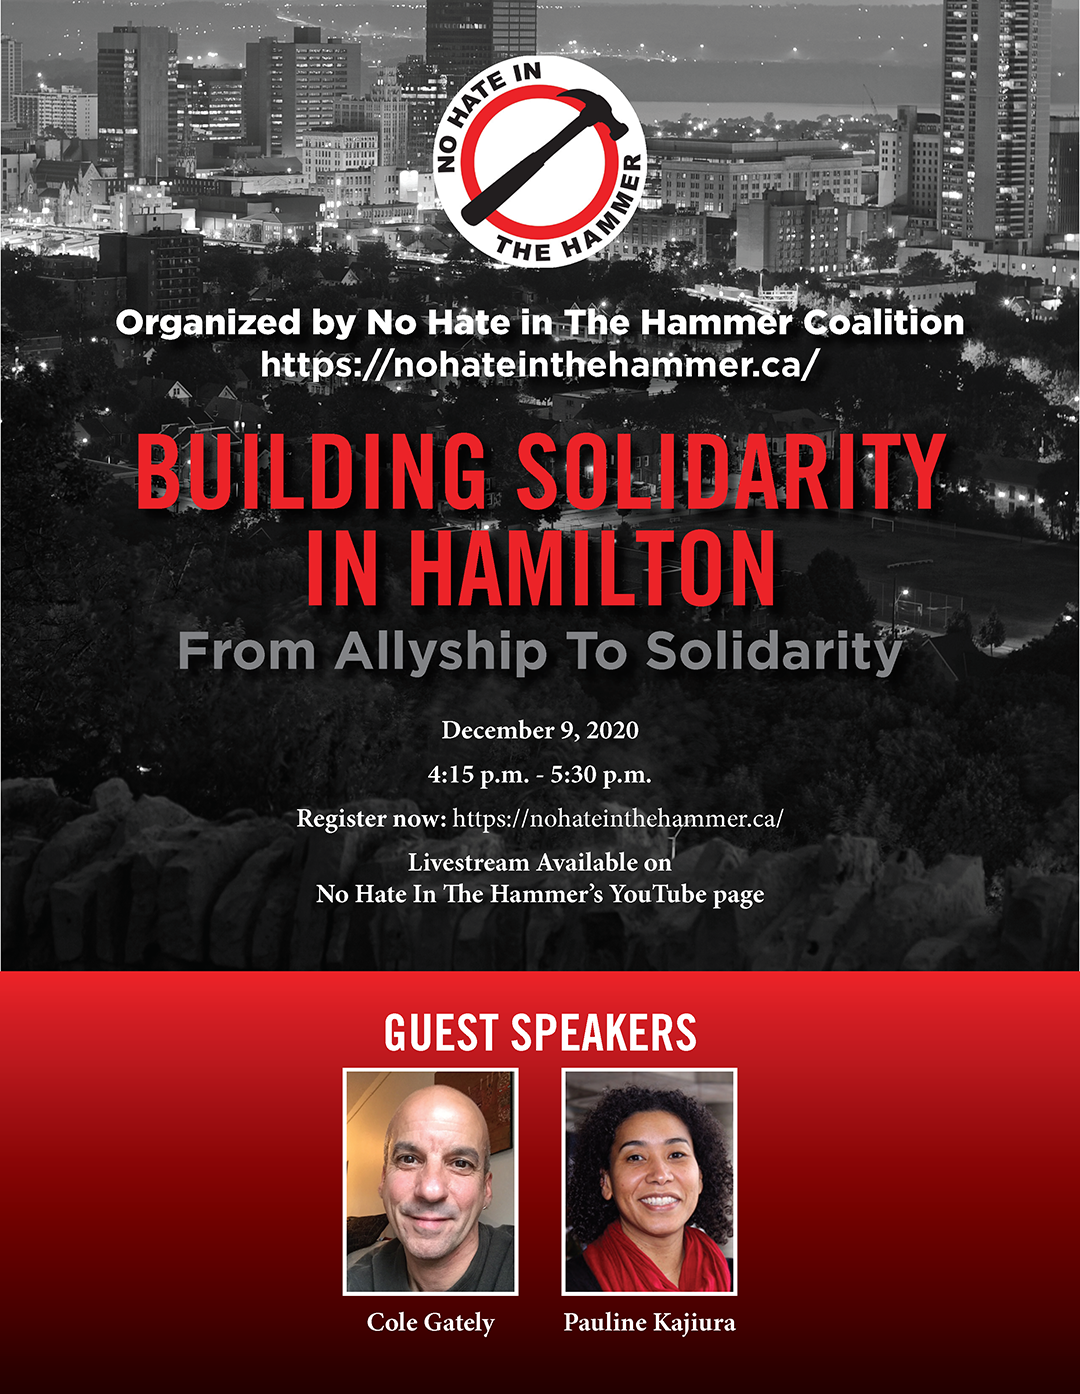 Poster for event called "Building Solidarity in Hamilton: From Allyship to Solidarity" on December 9 2020 from 4:15 pm to 5:30pm. Register at nohateinthehammer.ca/together.